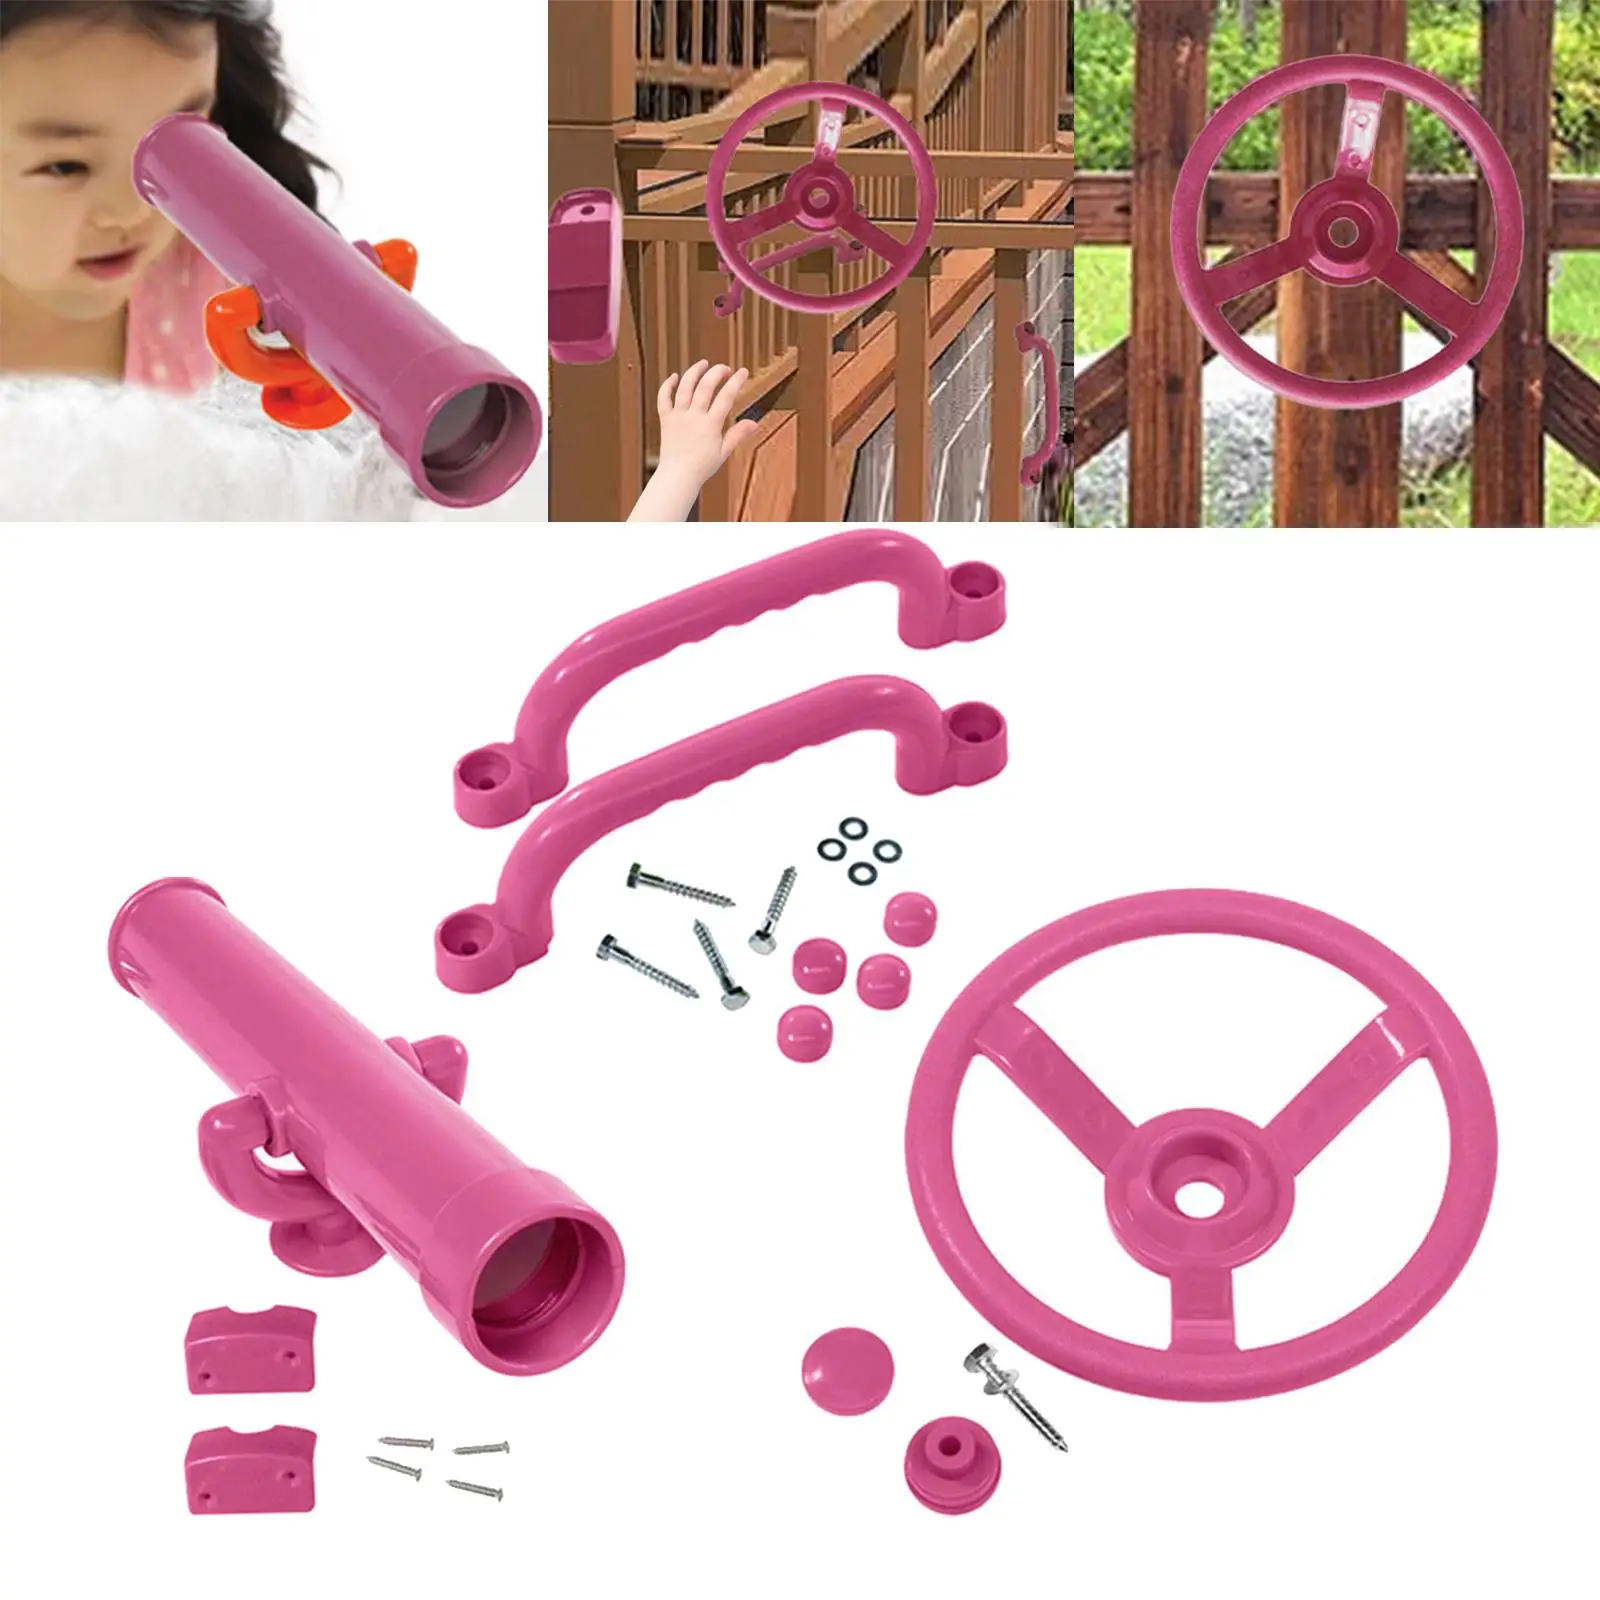 Playground Accessories Easy to Install Pirate Ship Wheel for Kids for Treehouse Swingset Backyard Playhouse Climbing Frame